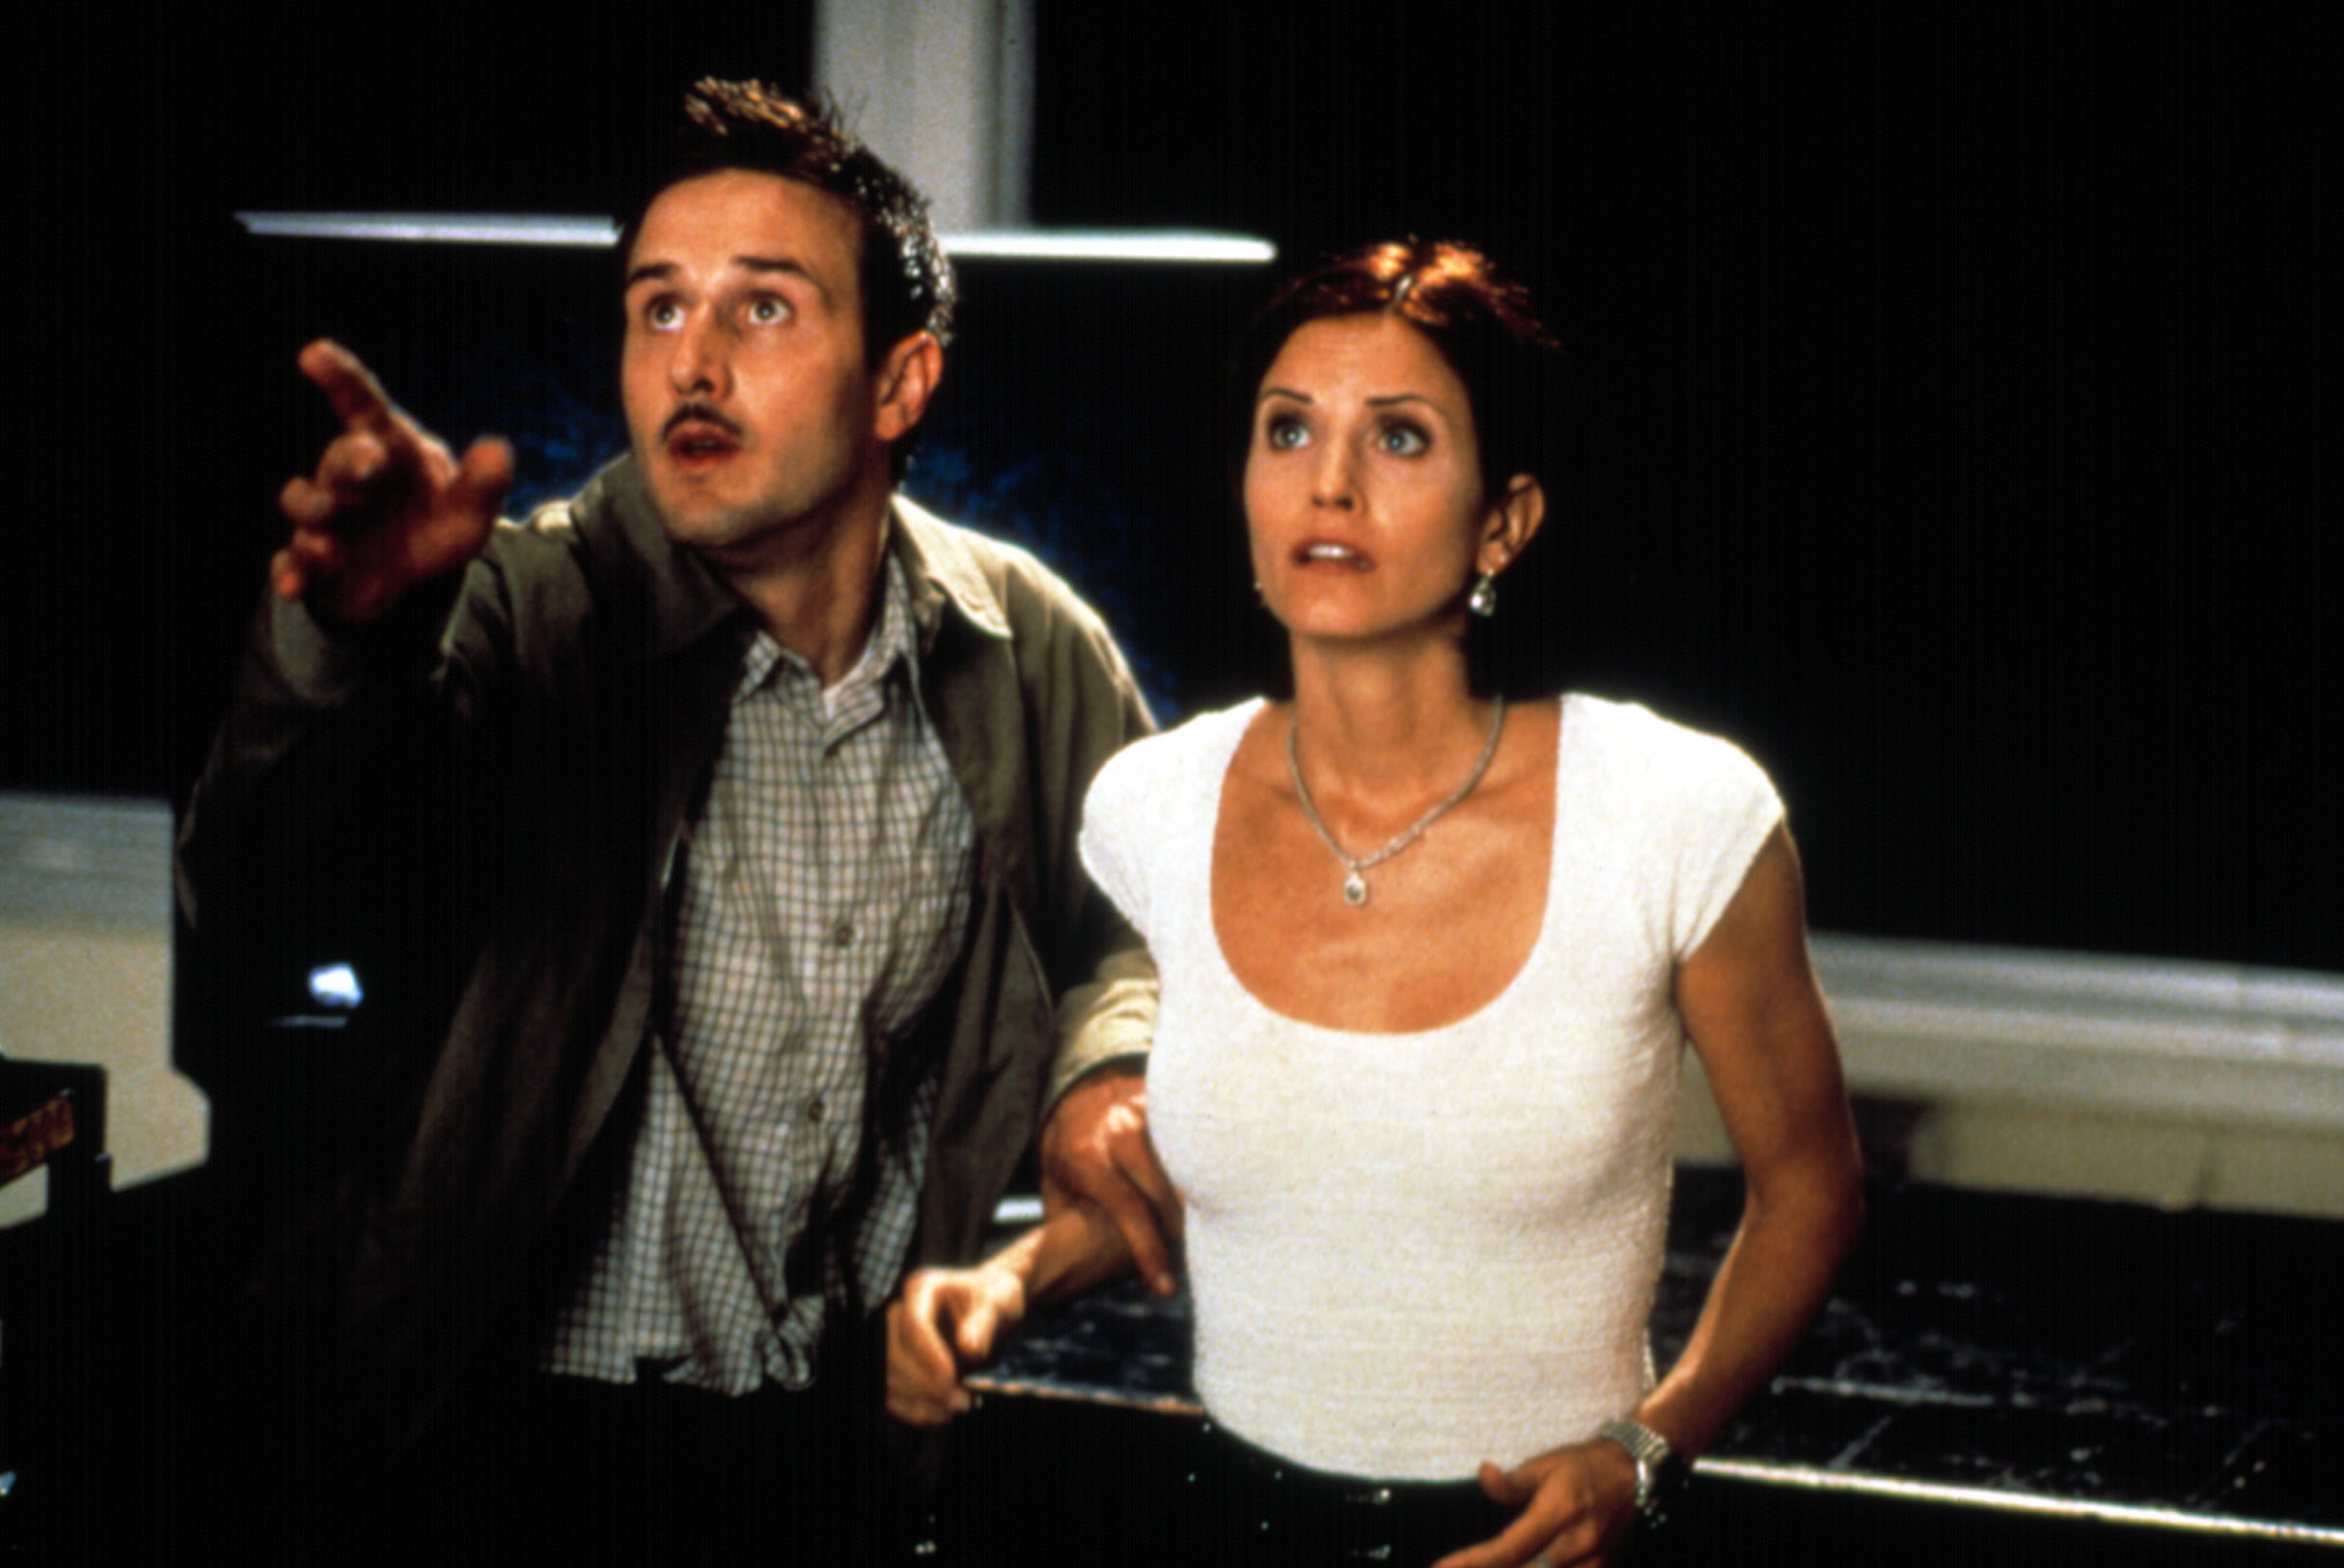 Courteney and David stand side by side in the movie and point to the distance